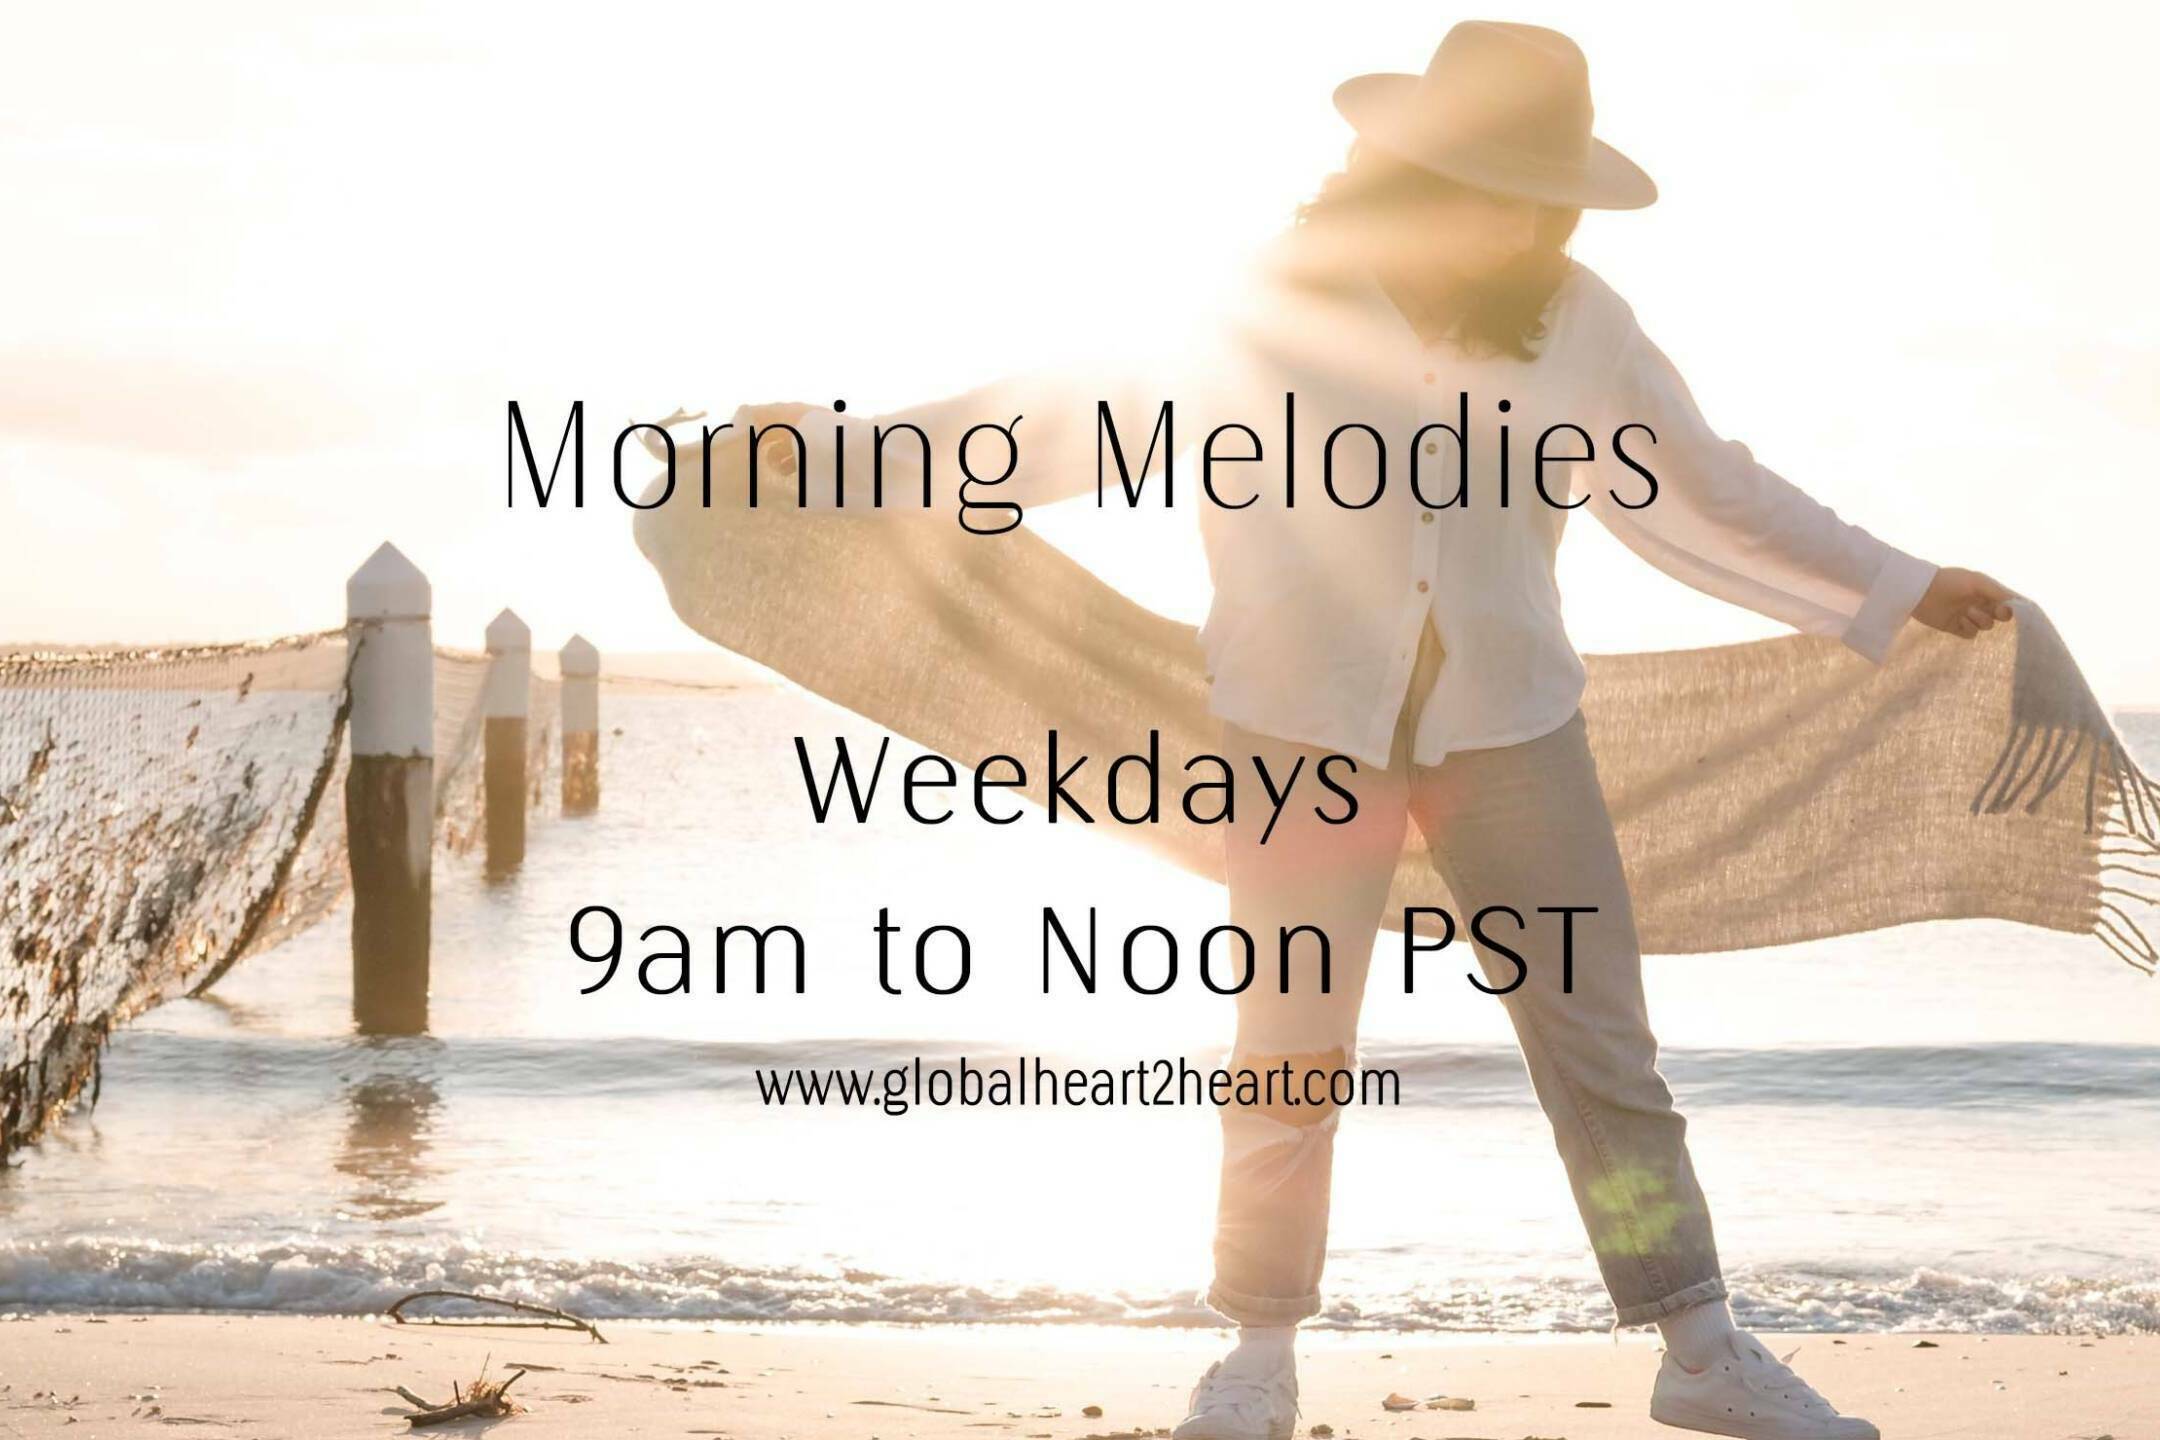 Global Heart 2 Heart Morning Melodies 9am To12 pm